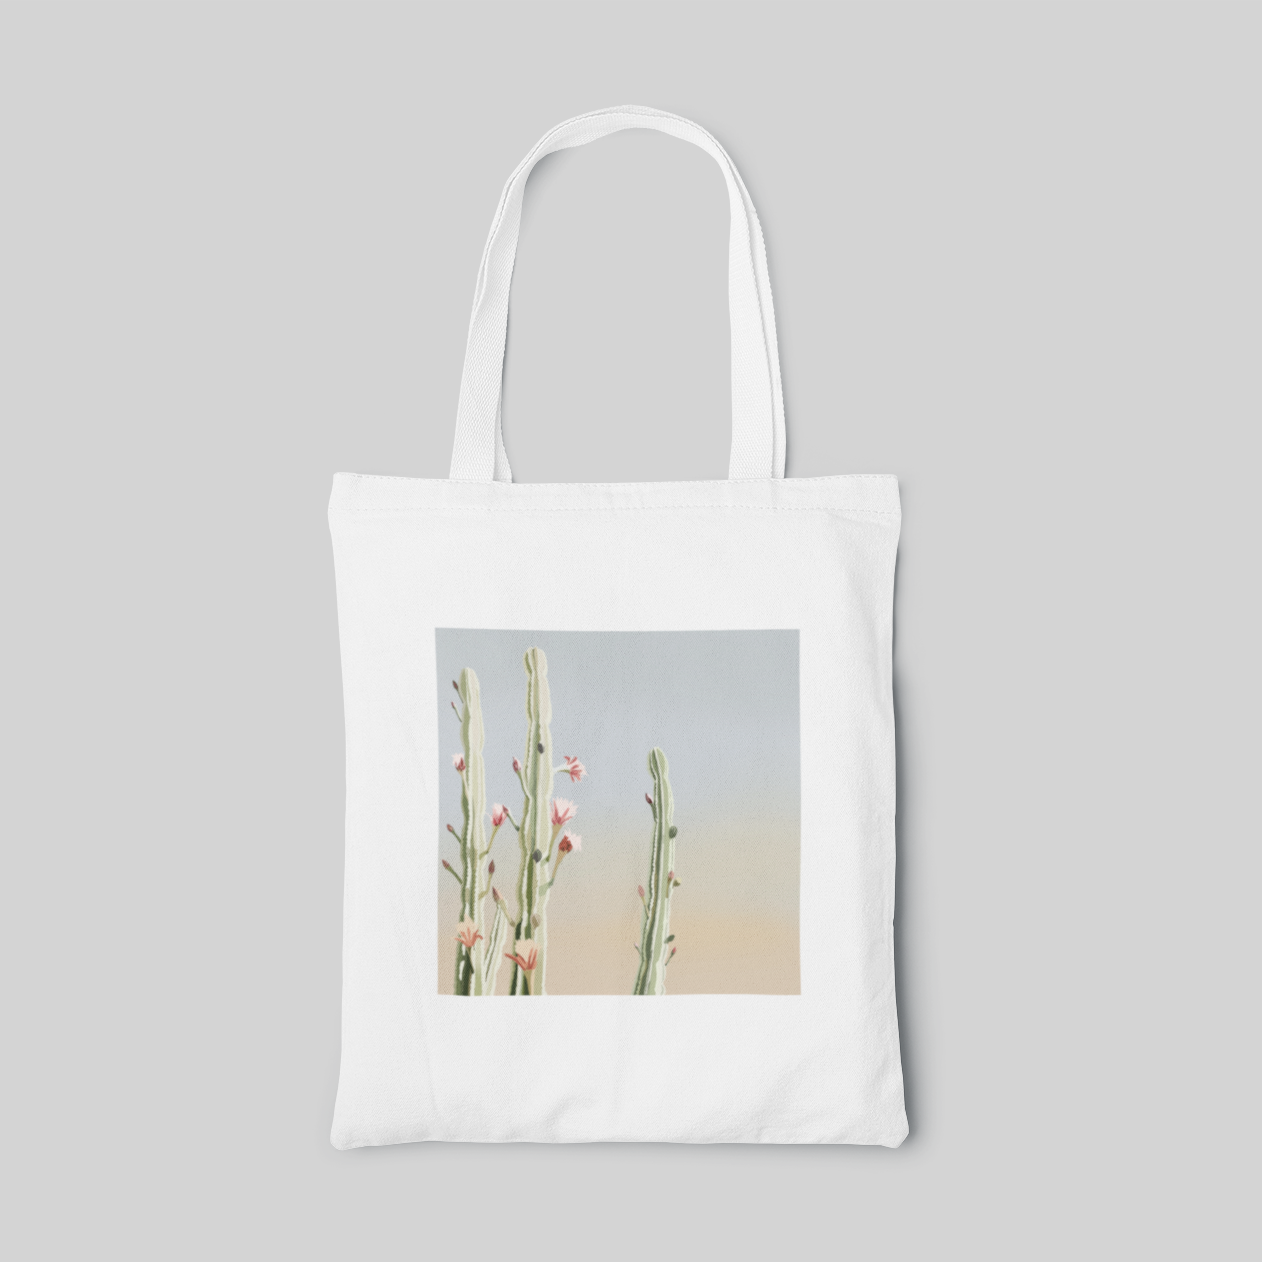 White design tote bag with three cacti in blue to peach ombre background, front side